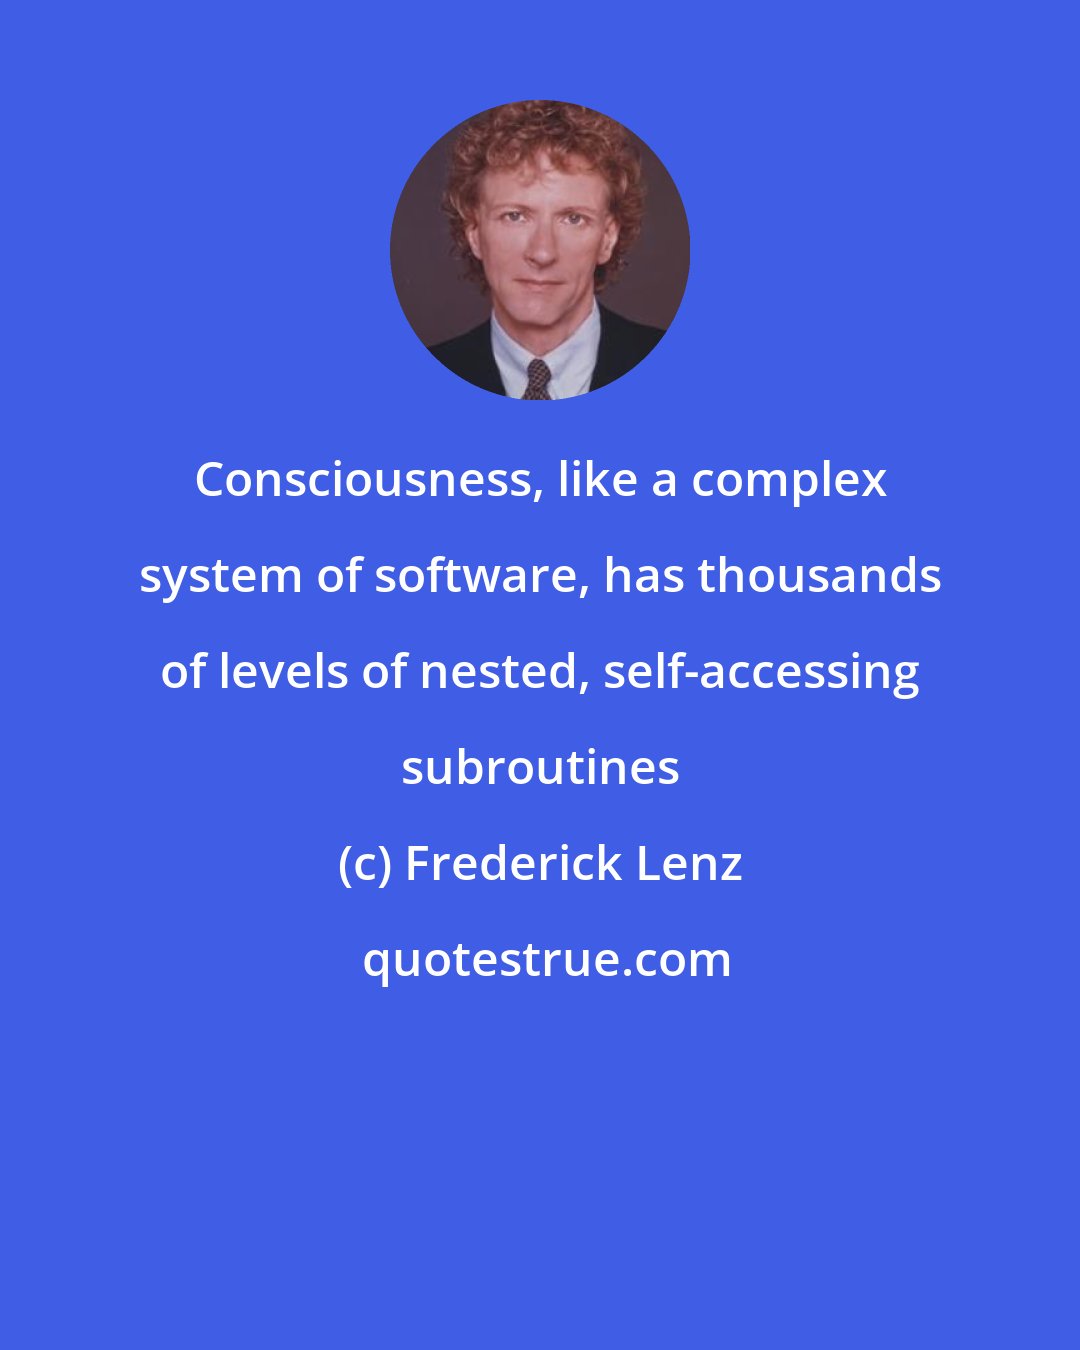 Frederick Lenz: Consciousness, like a complex system of software, has thousands of levels of nested, self-accessing subroutines